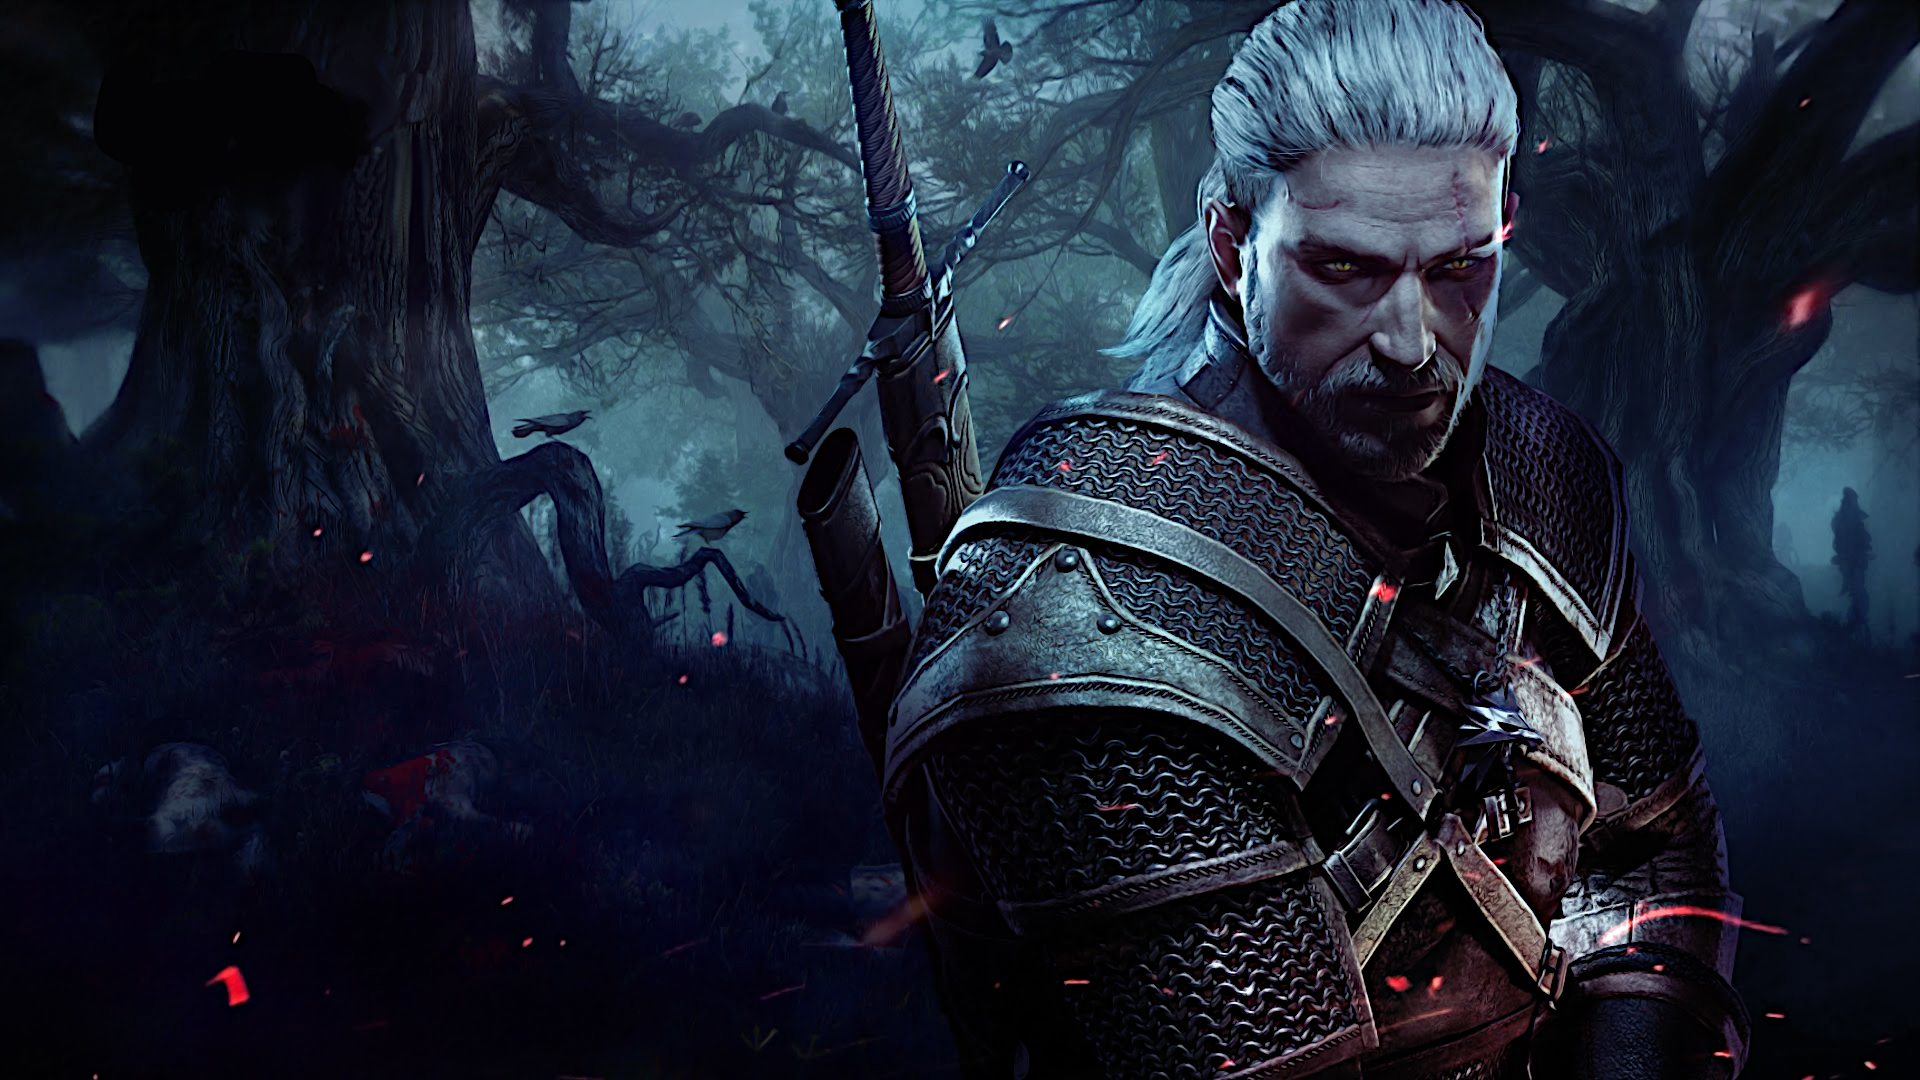 The Witcher 3 Wild Hunt Patch 4.02 - Improvements Fixes and Performance Enhancements